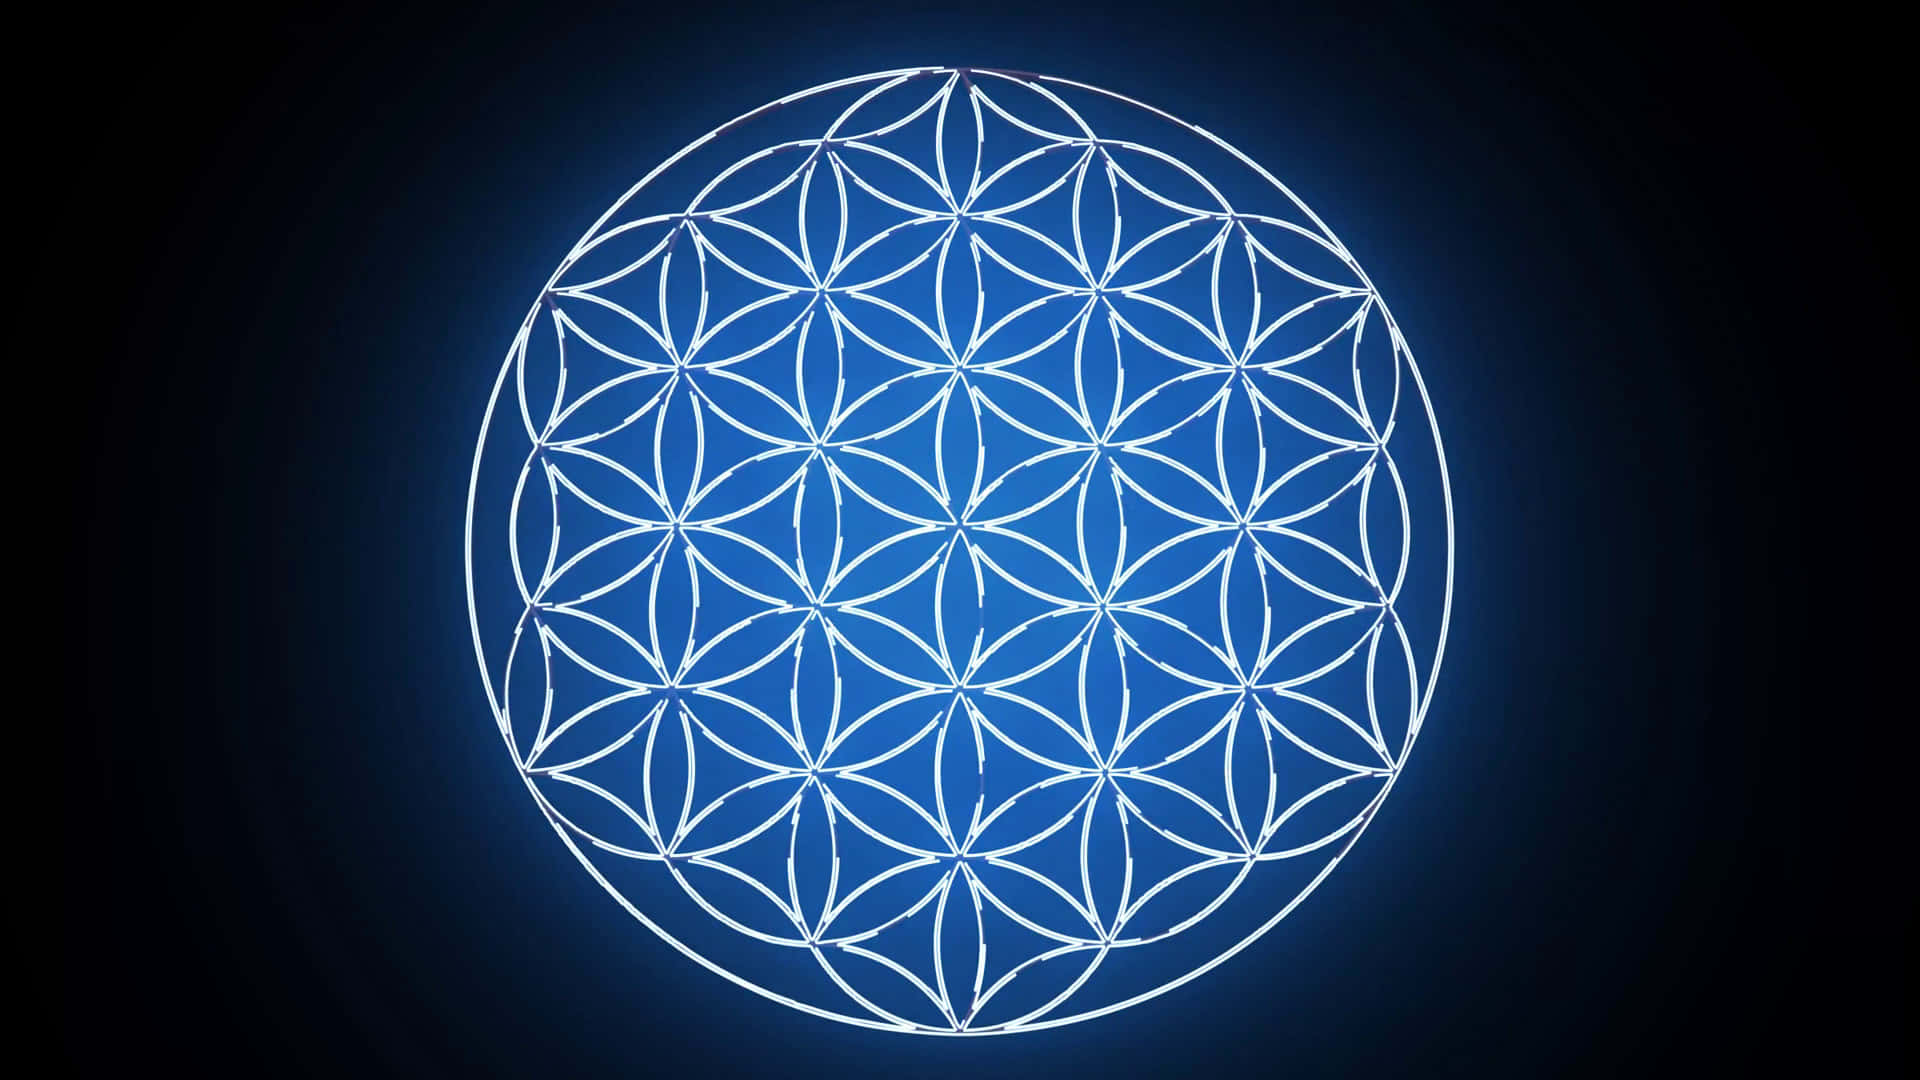 A Flower Of Life Symbol On A Black Background Wallpaper